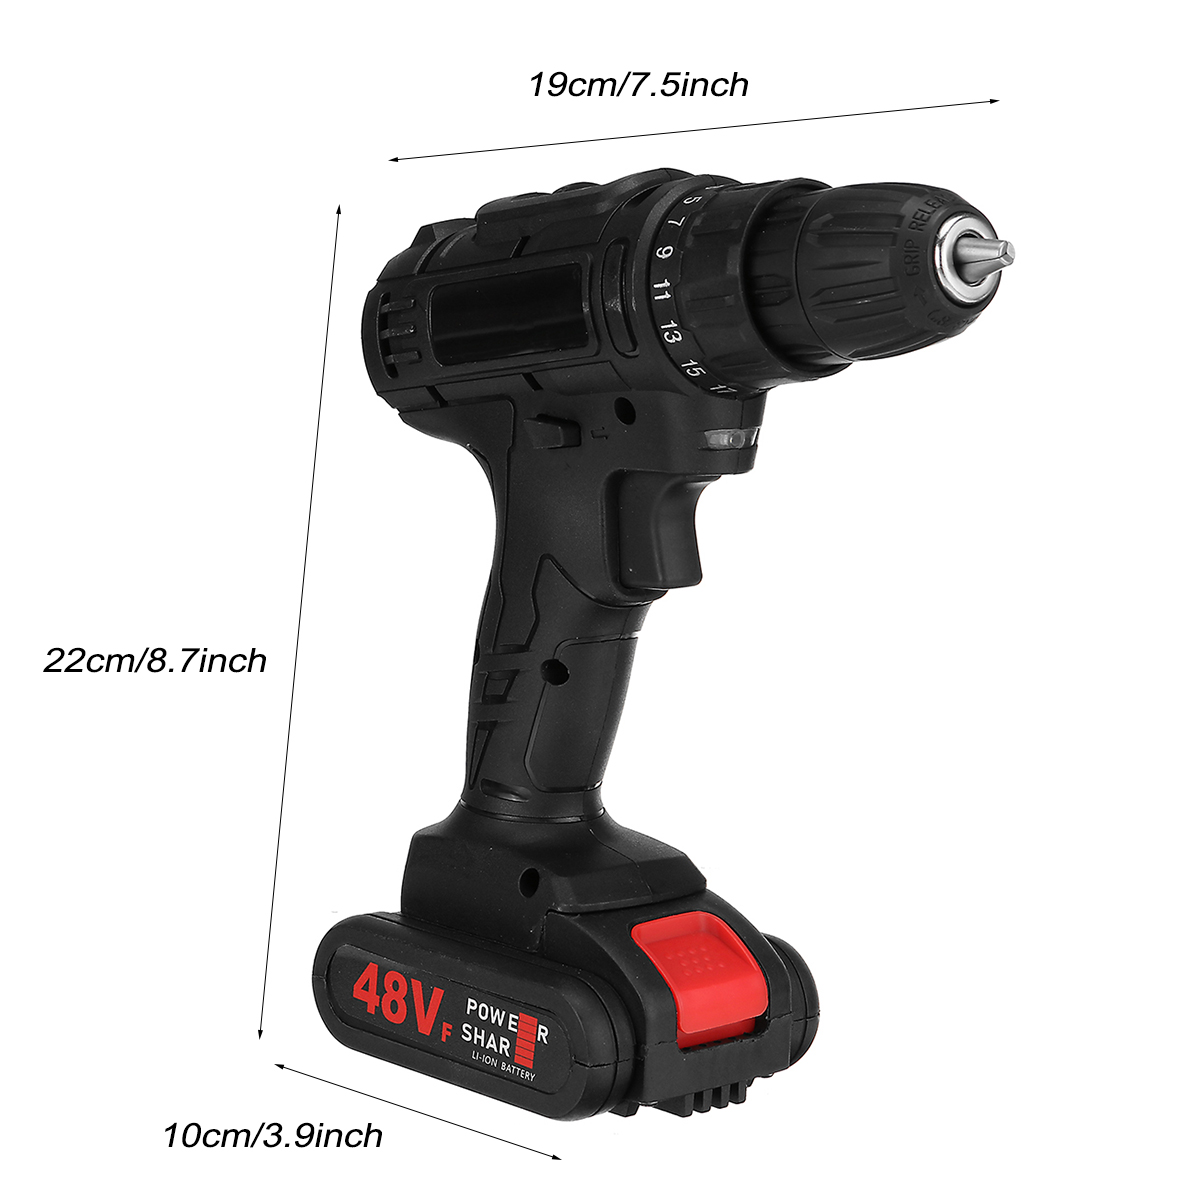 Cordless-Impact-Wrench-Drill-Socket-25-Speeds-LED-Electric-Screwdrive-w-12-Batteries-1712153-7